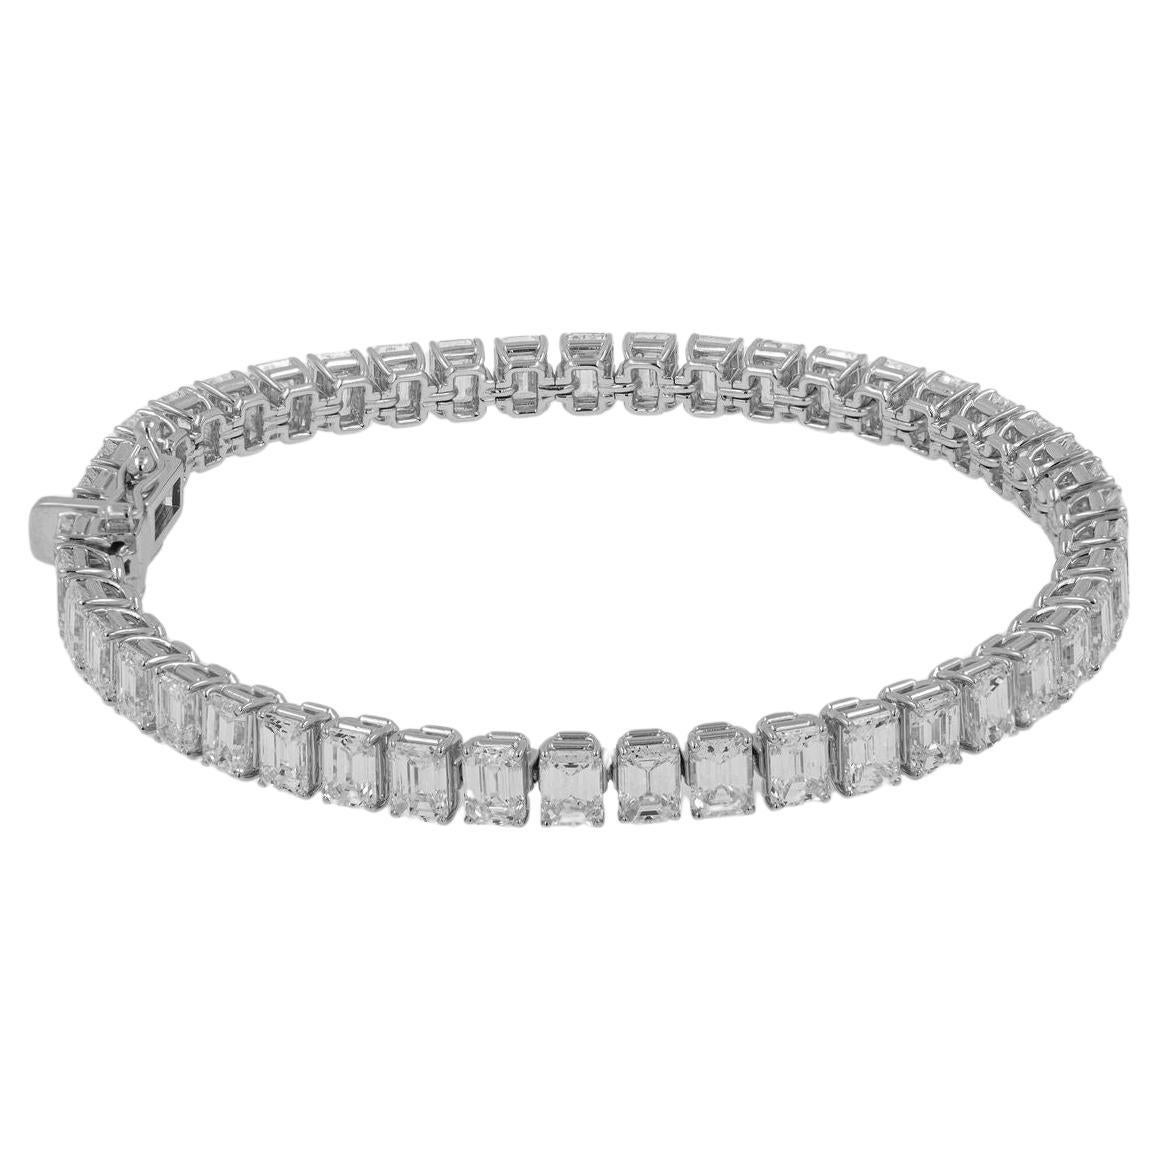 9 Carat Total Weight White Gold Diamond Bracelet For Sale